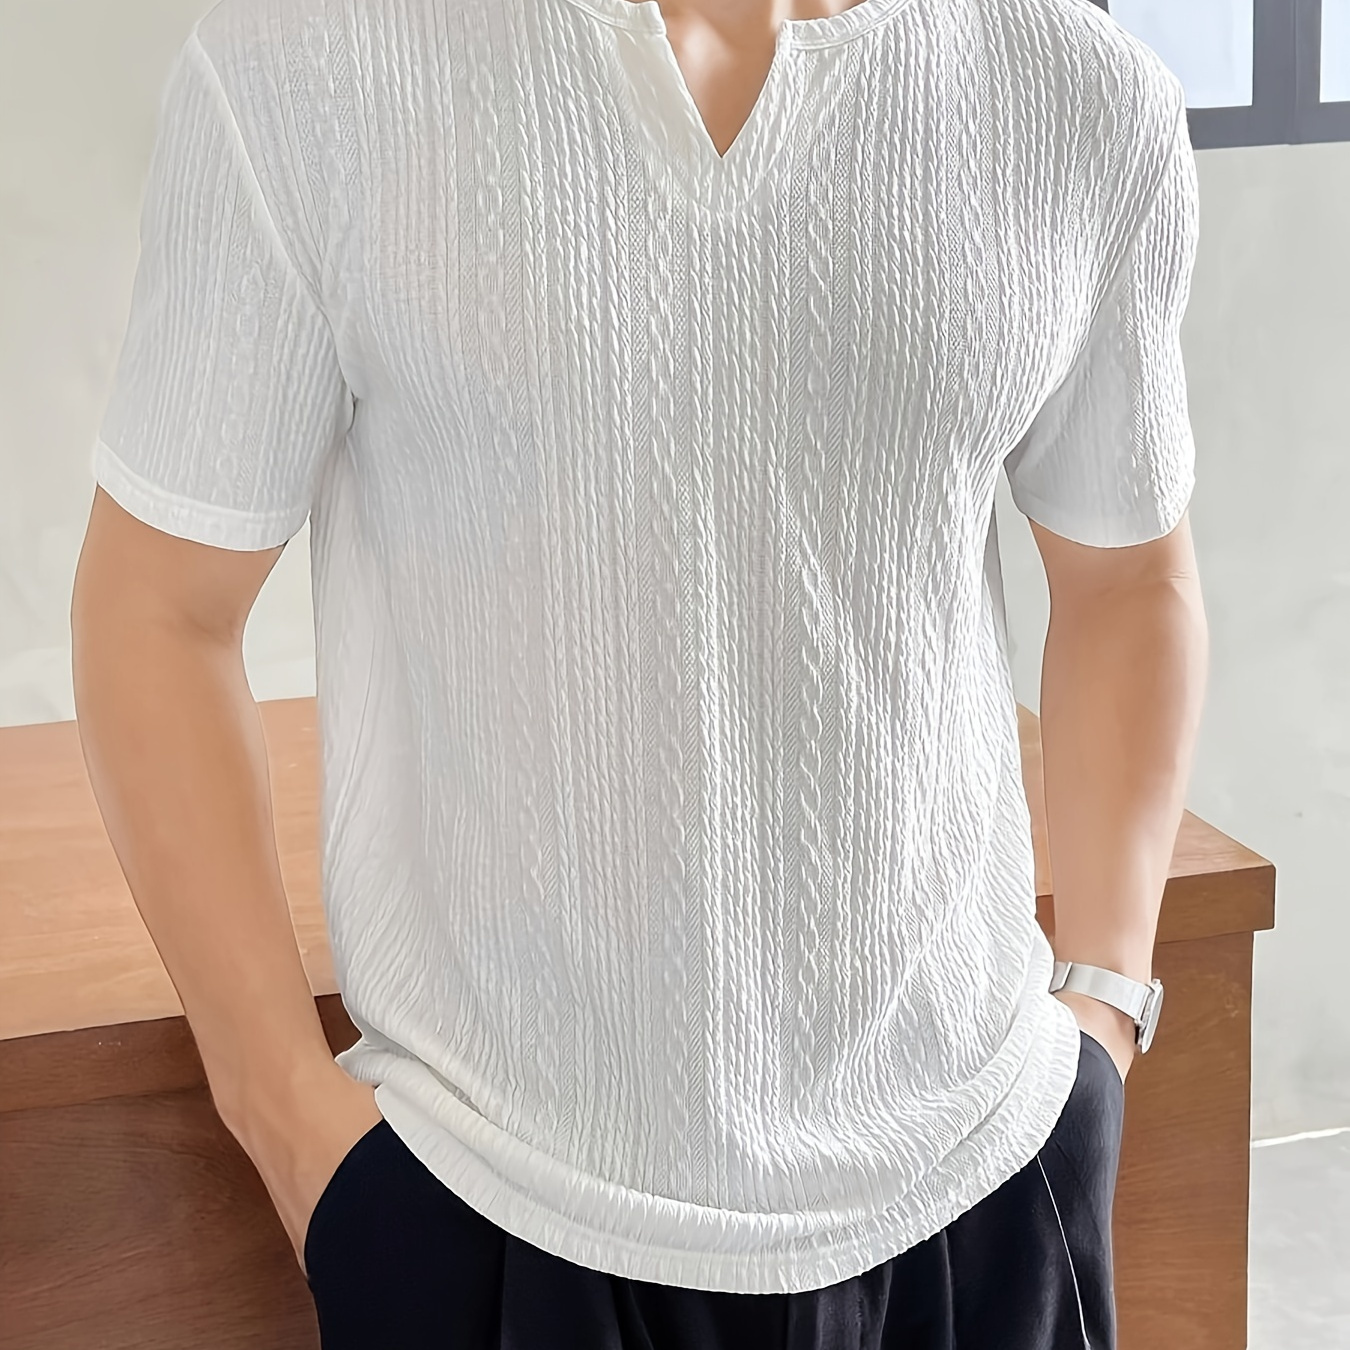 

Men's Solid Color And Stripe Pattern Knit V-neck And Short Sleeve T-shirt, Stylish And Trendy Tops Suitable For Summer Leisurewear